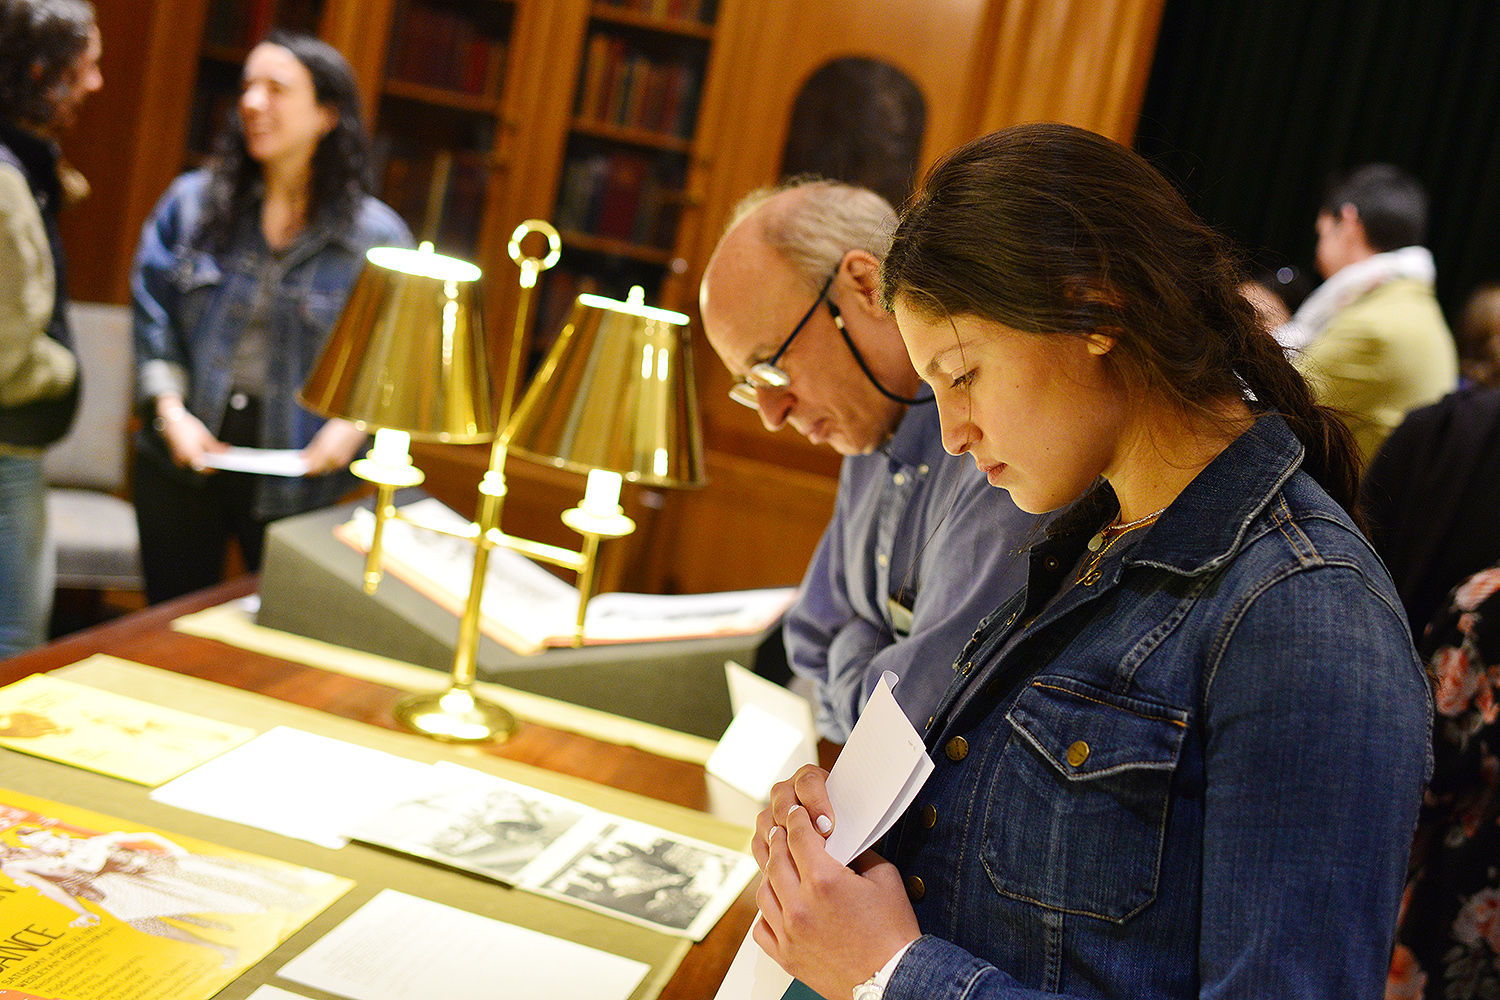 Students from Wesleyan’s French 325 class Museums, Objects and Empire, recently presented a pop-up exhibition on the history that surrounds Wesleyan’s former museum that once occupied Judd Hall from 1871 to 1957.